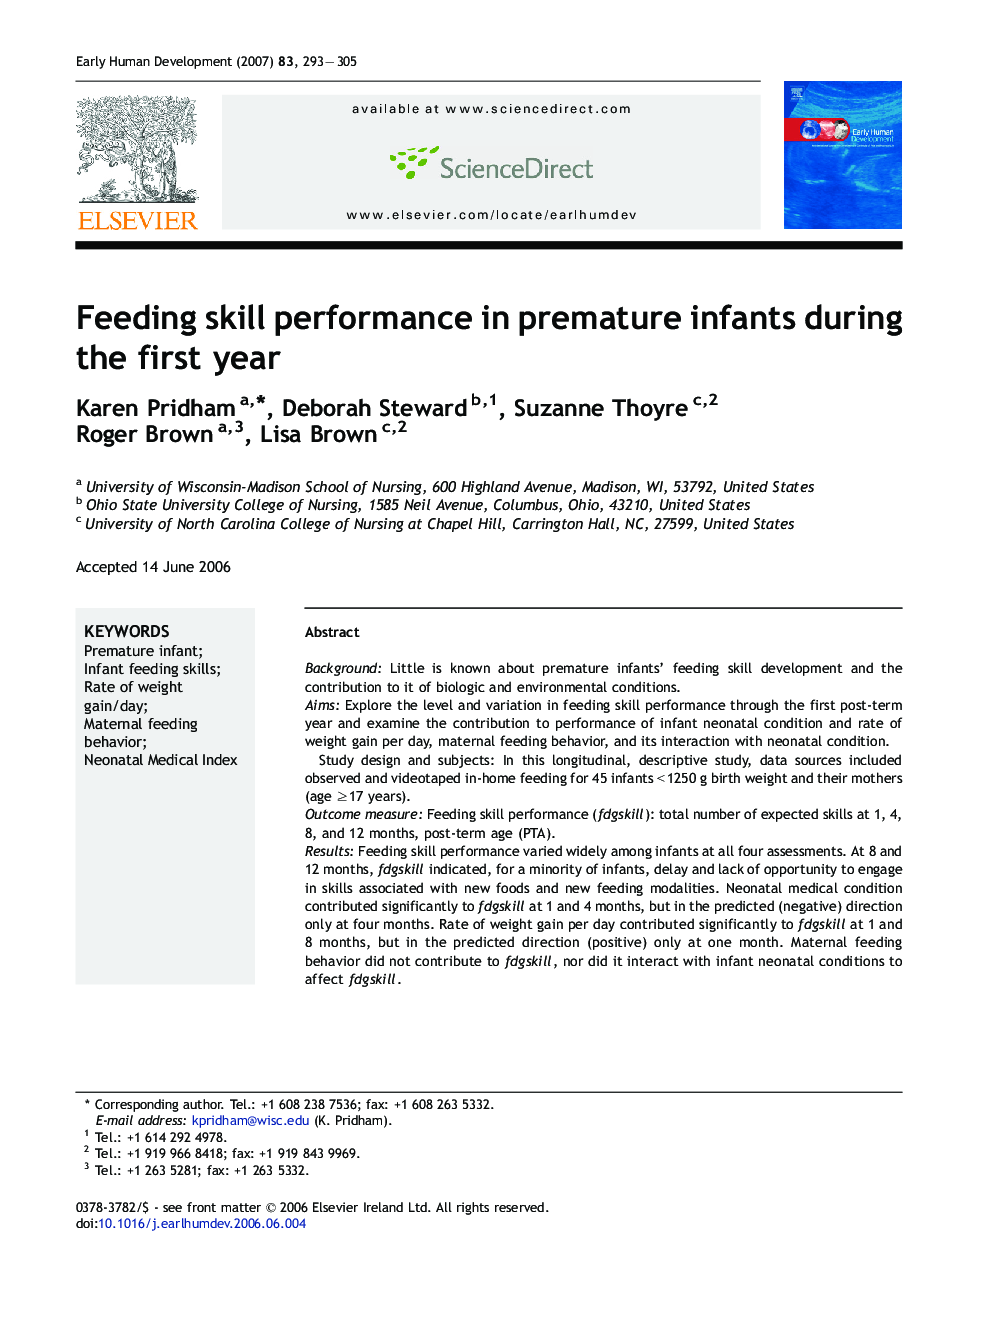 Feeding skill performance in premature infants during the first year